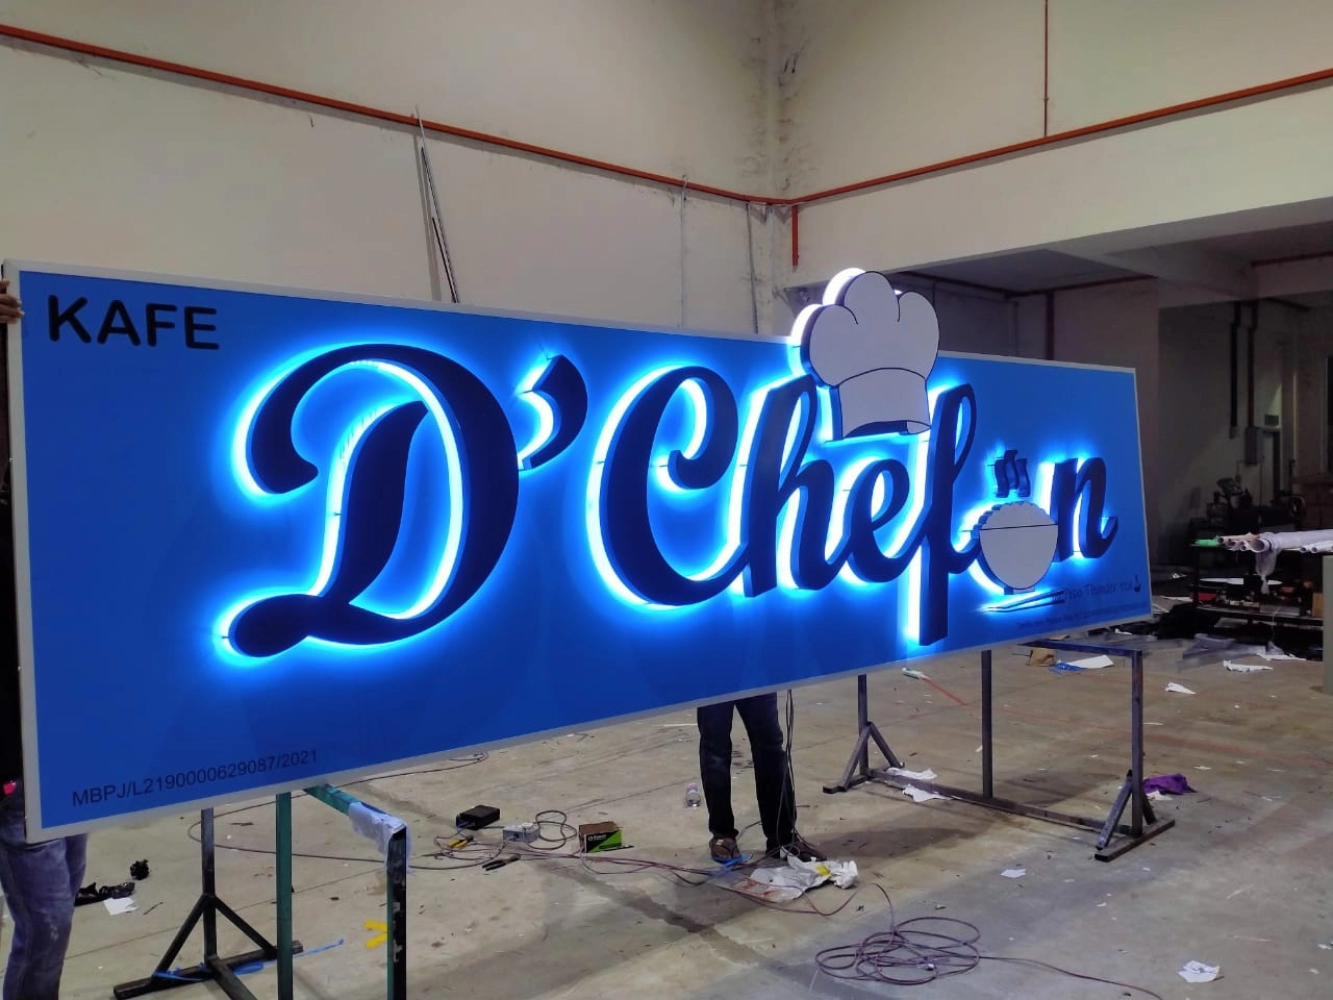 OFFER OFFER OFFER ! ! ! 3D LED SIGNBOARD  RM 3500 ! ! !  INCLUDED INSTALLATION  Ground Floor  2 YEAR WARRANTY FOR COLOR Included Design ! ! !  Whatsapp me...  http://www.wasap.my/60162340804  Whatsapp me...  http://www.wasap.my/60162340804  3d led boxup signbord #3dledsignboard #3dboxup #3dsignboard #3dledboxup #signboard  Whatsapp me...  http://www.wasap.my/60162340804  0162340804 